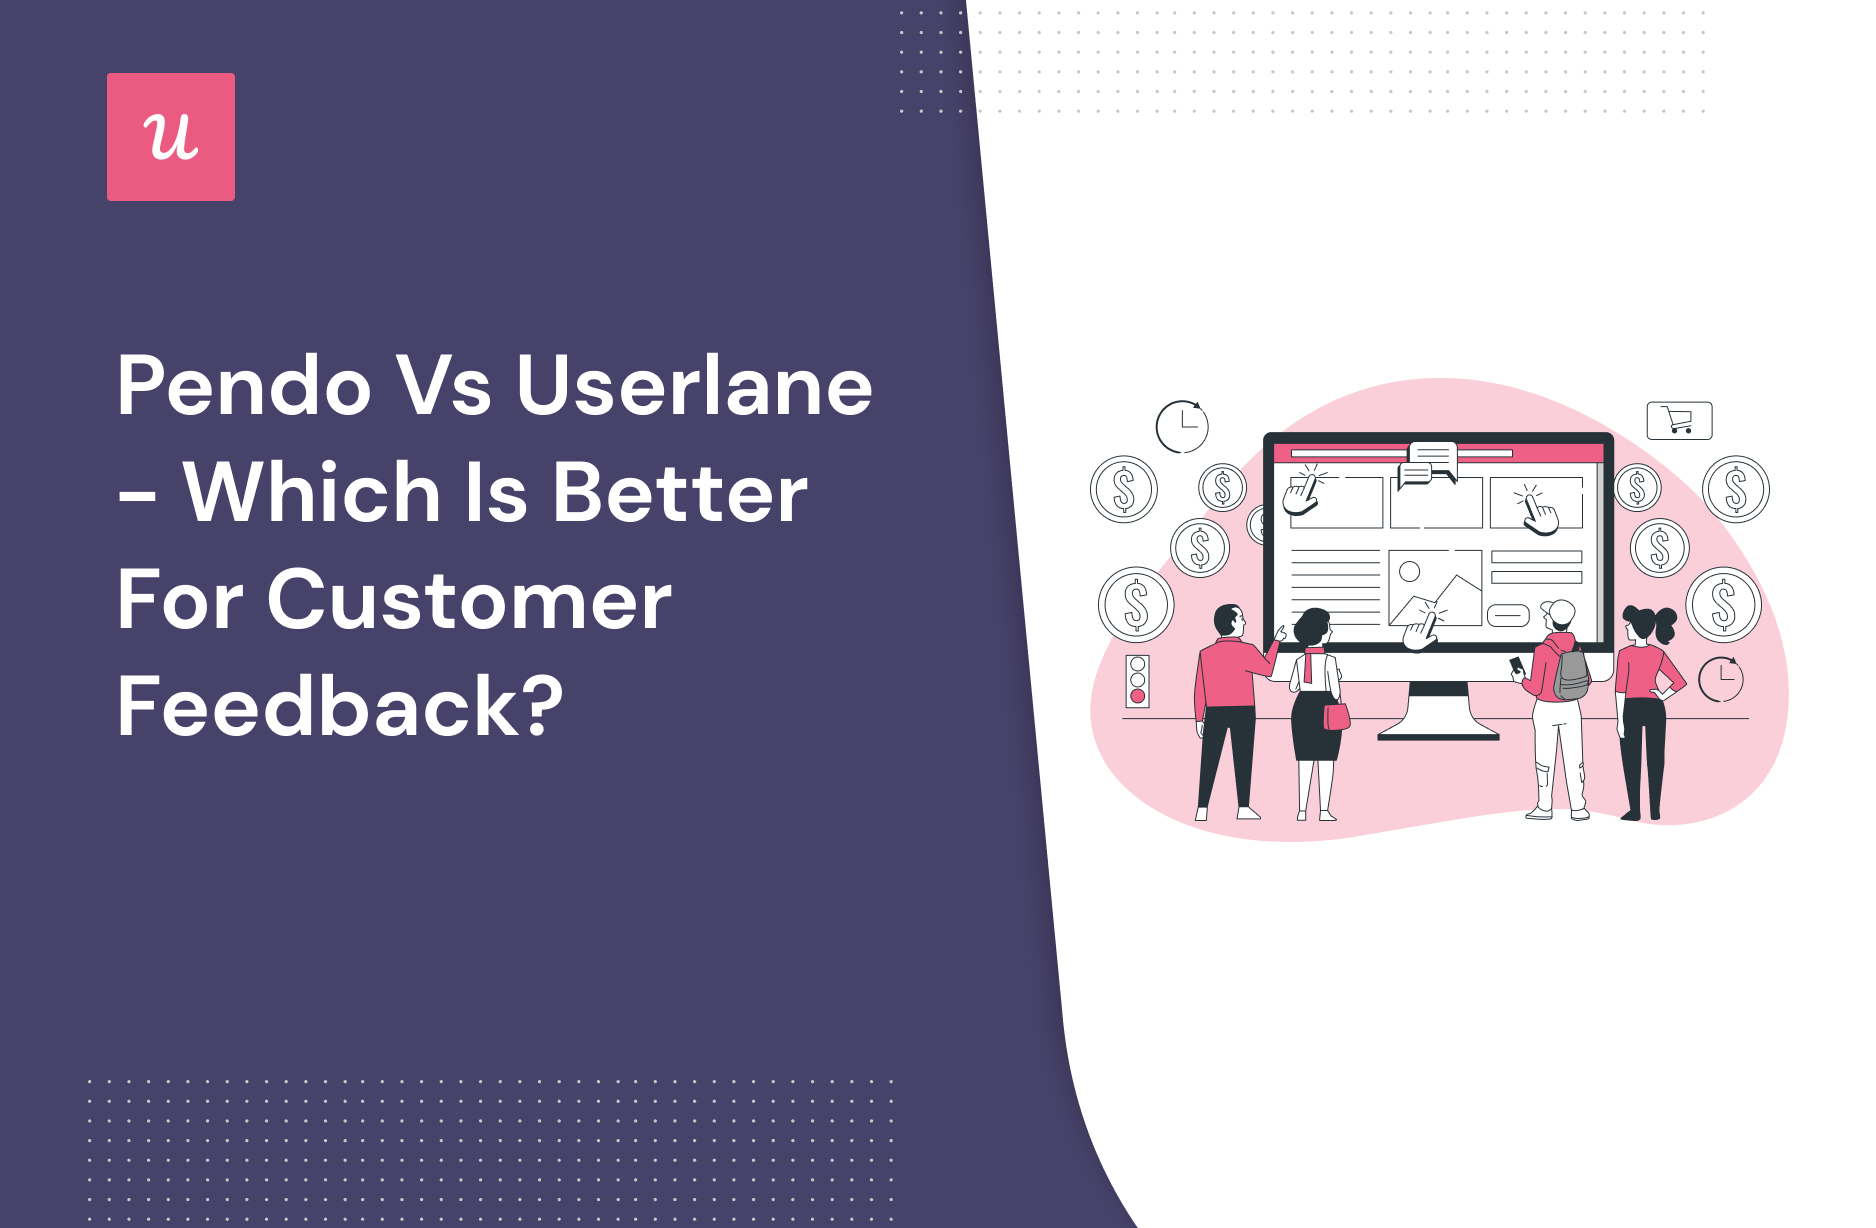 Pendo vs Userlane - which is better for Customer Feedback (1)